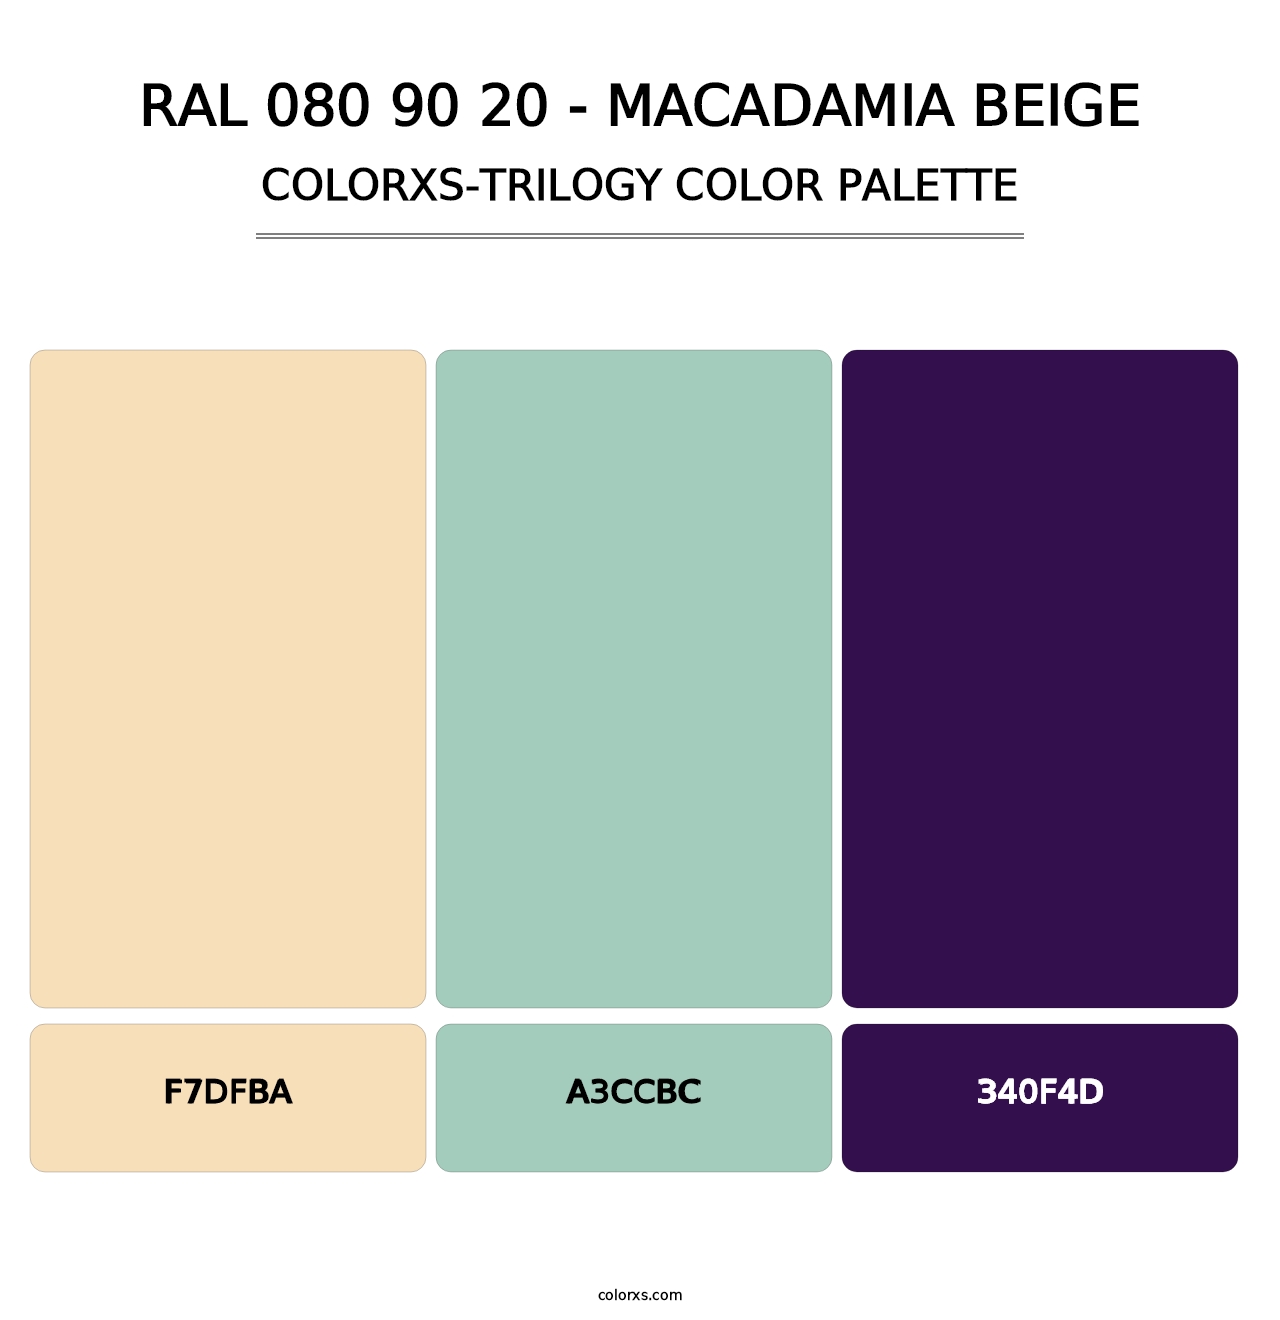 RAL 080 90 20 - Macadamia Beige - Colorxs Trilogy Palette